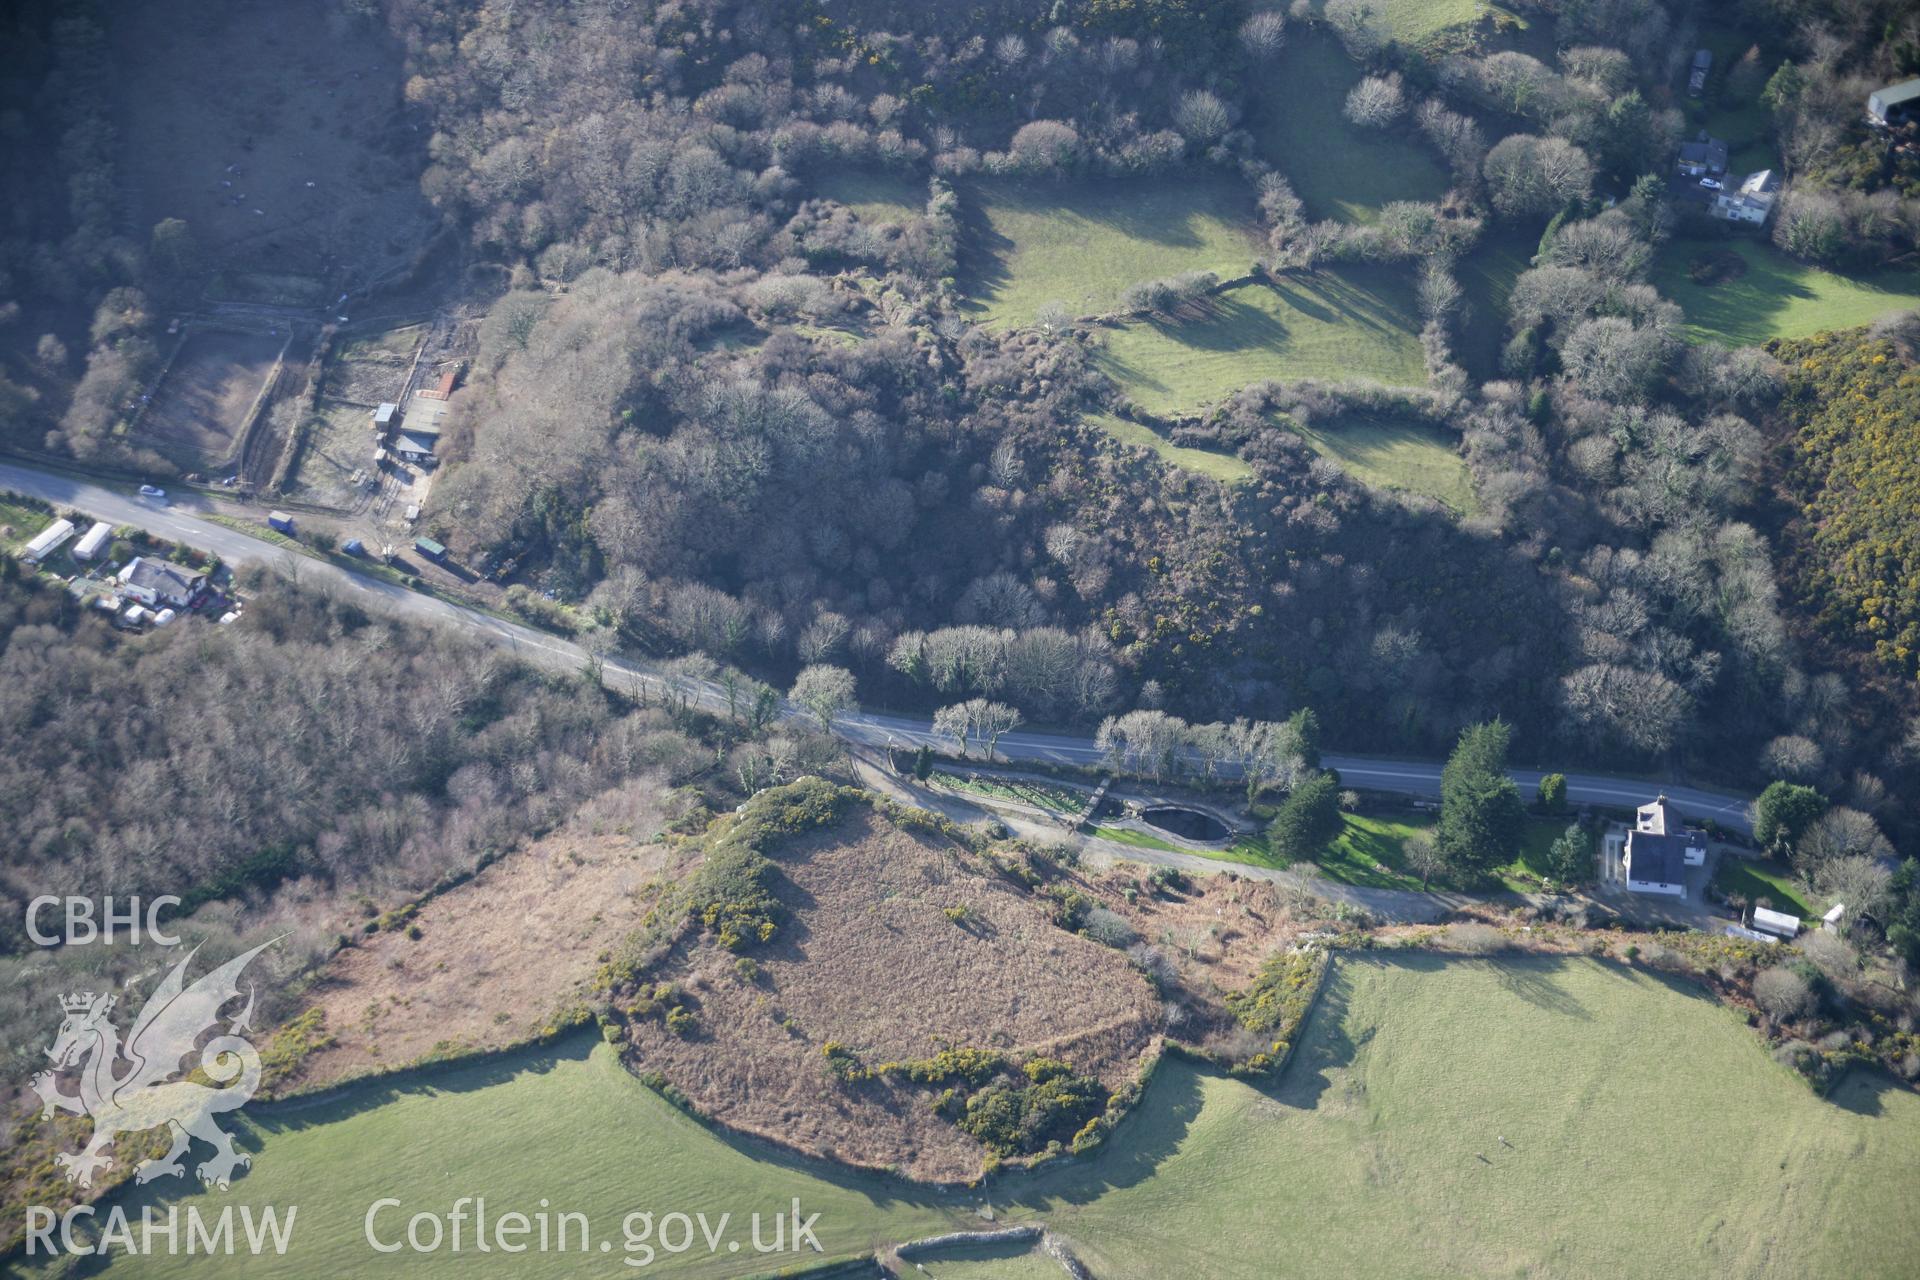 RCAHMW colour oblique aerial photograph of Pen-y-Gaer Promontary Fort Enclosure, viewed from the north-east. Taken on 09 February 2006 by Toby Driver.